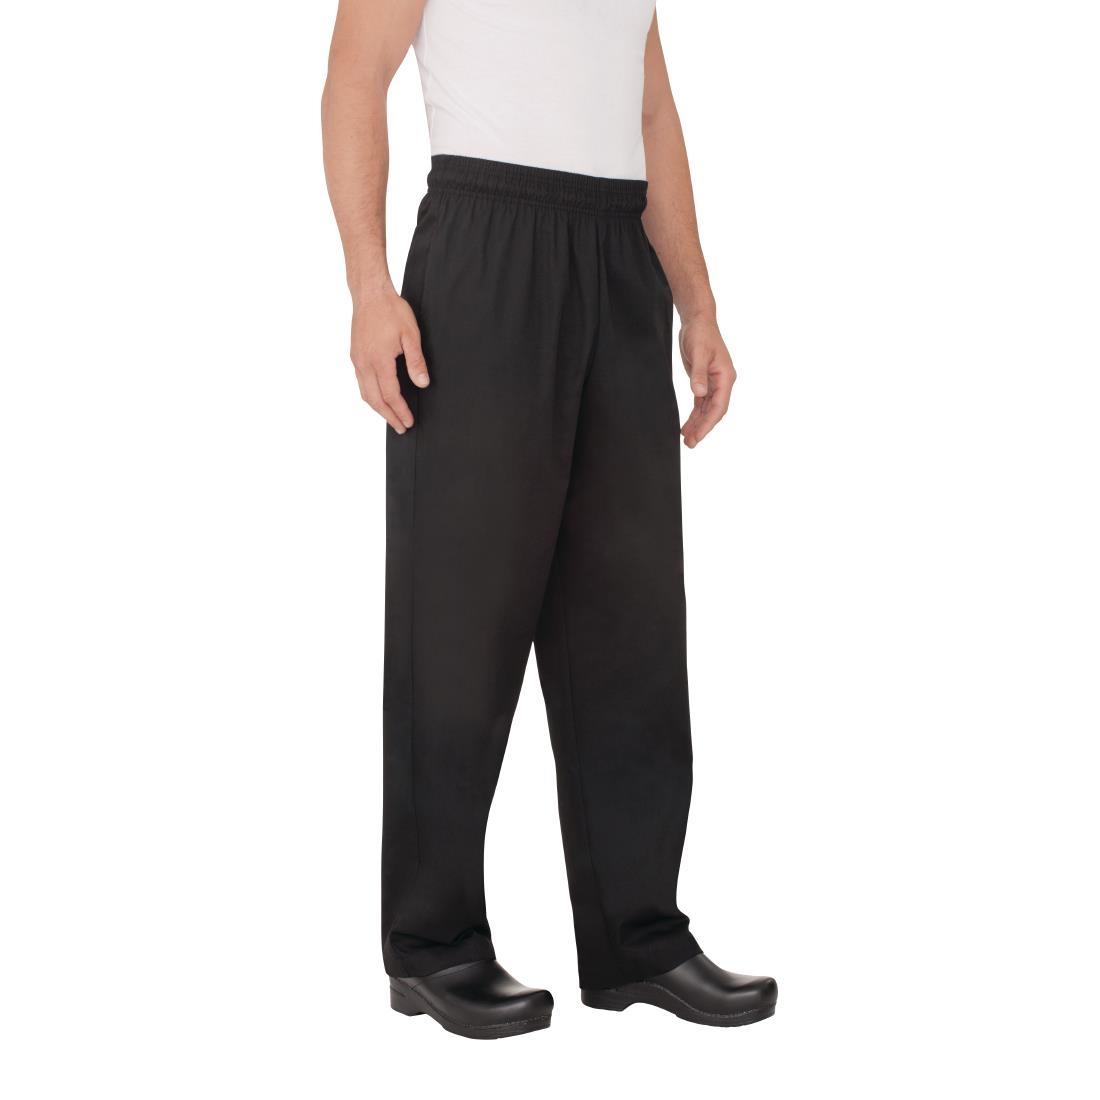 Chef Works Essential Baggy Trousers Black 6XL - A029-6XL  - 4